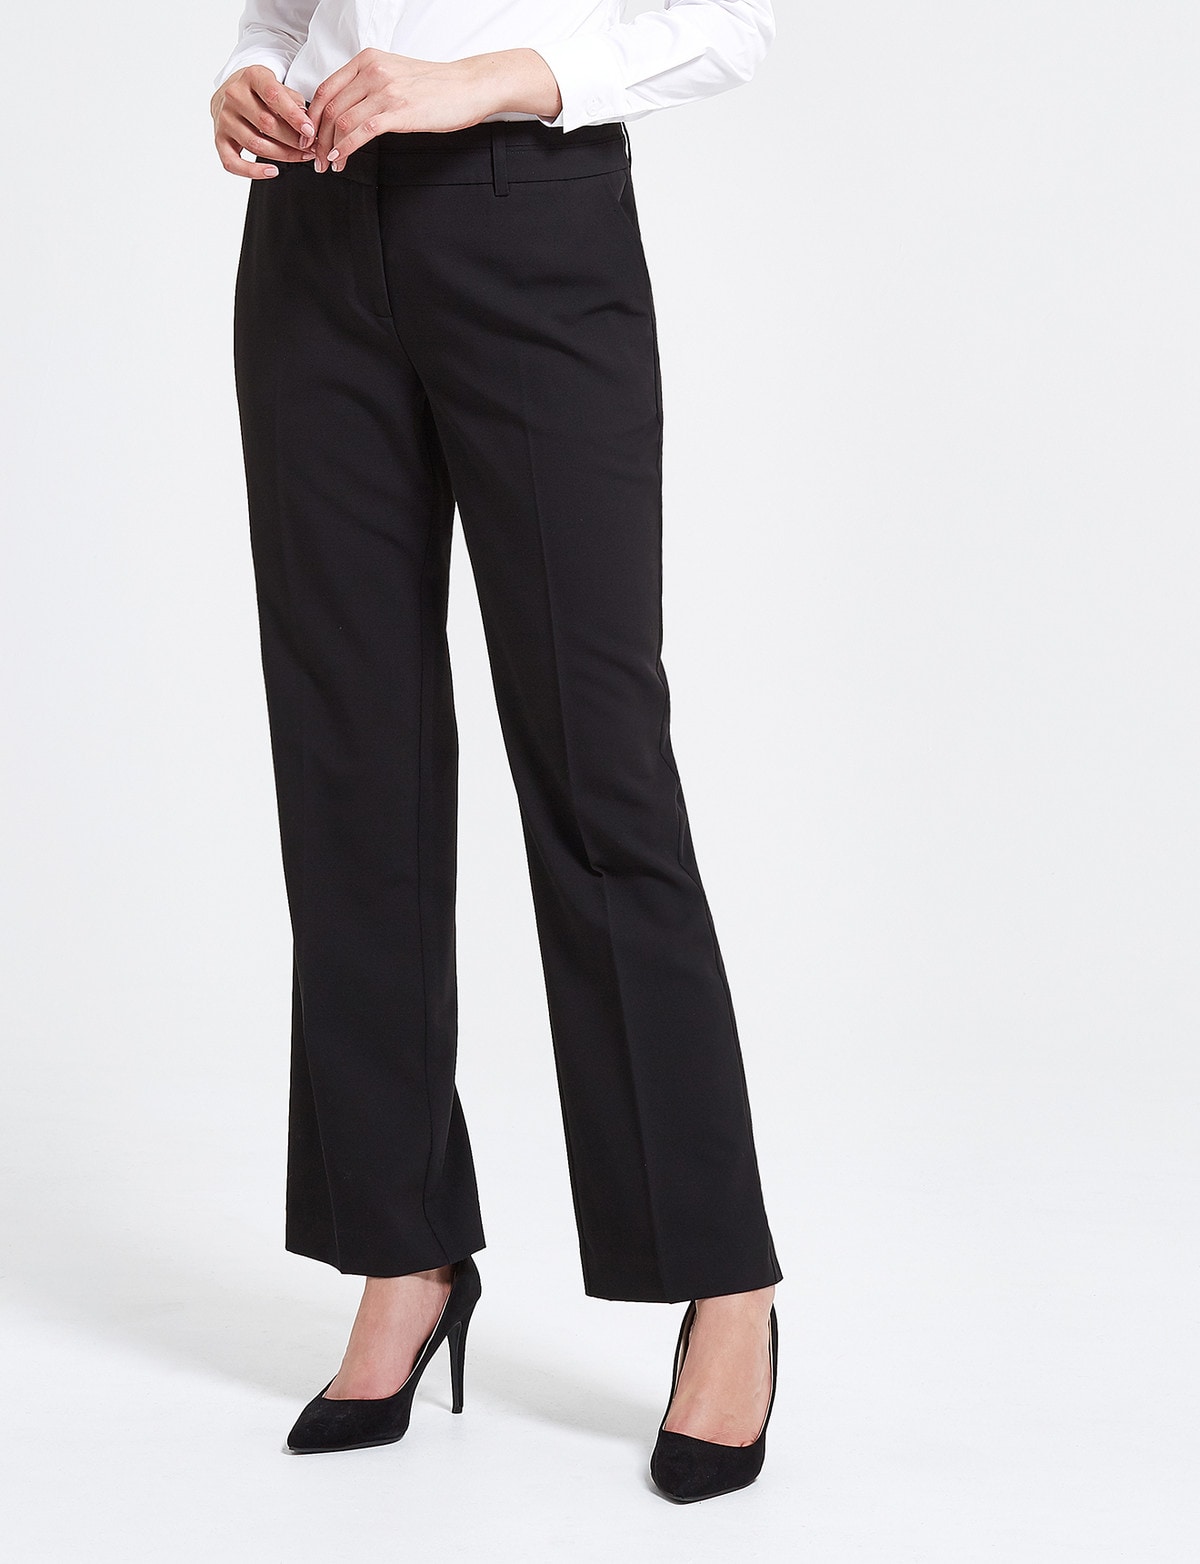 Oliver Black Two-Way-Stretch Classic Pant, Longer-Length, Black